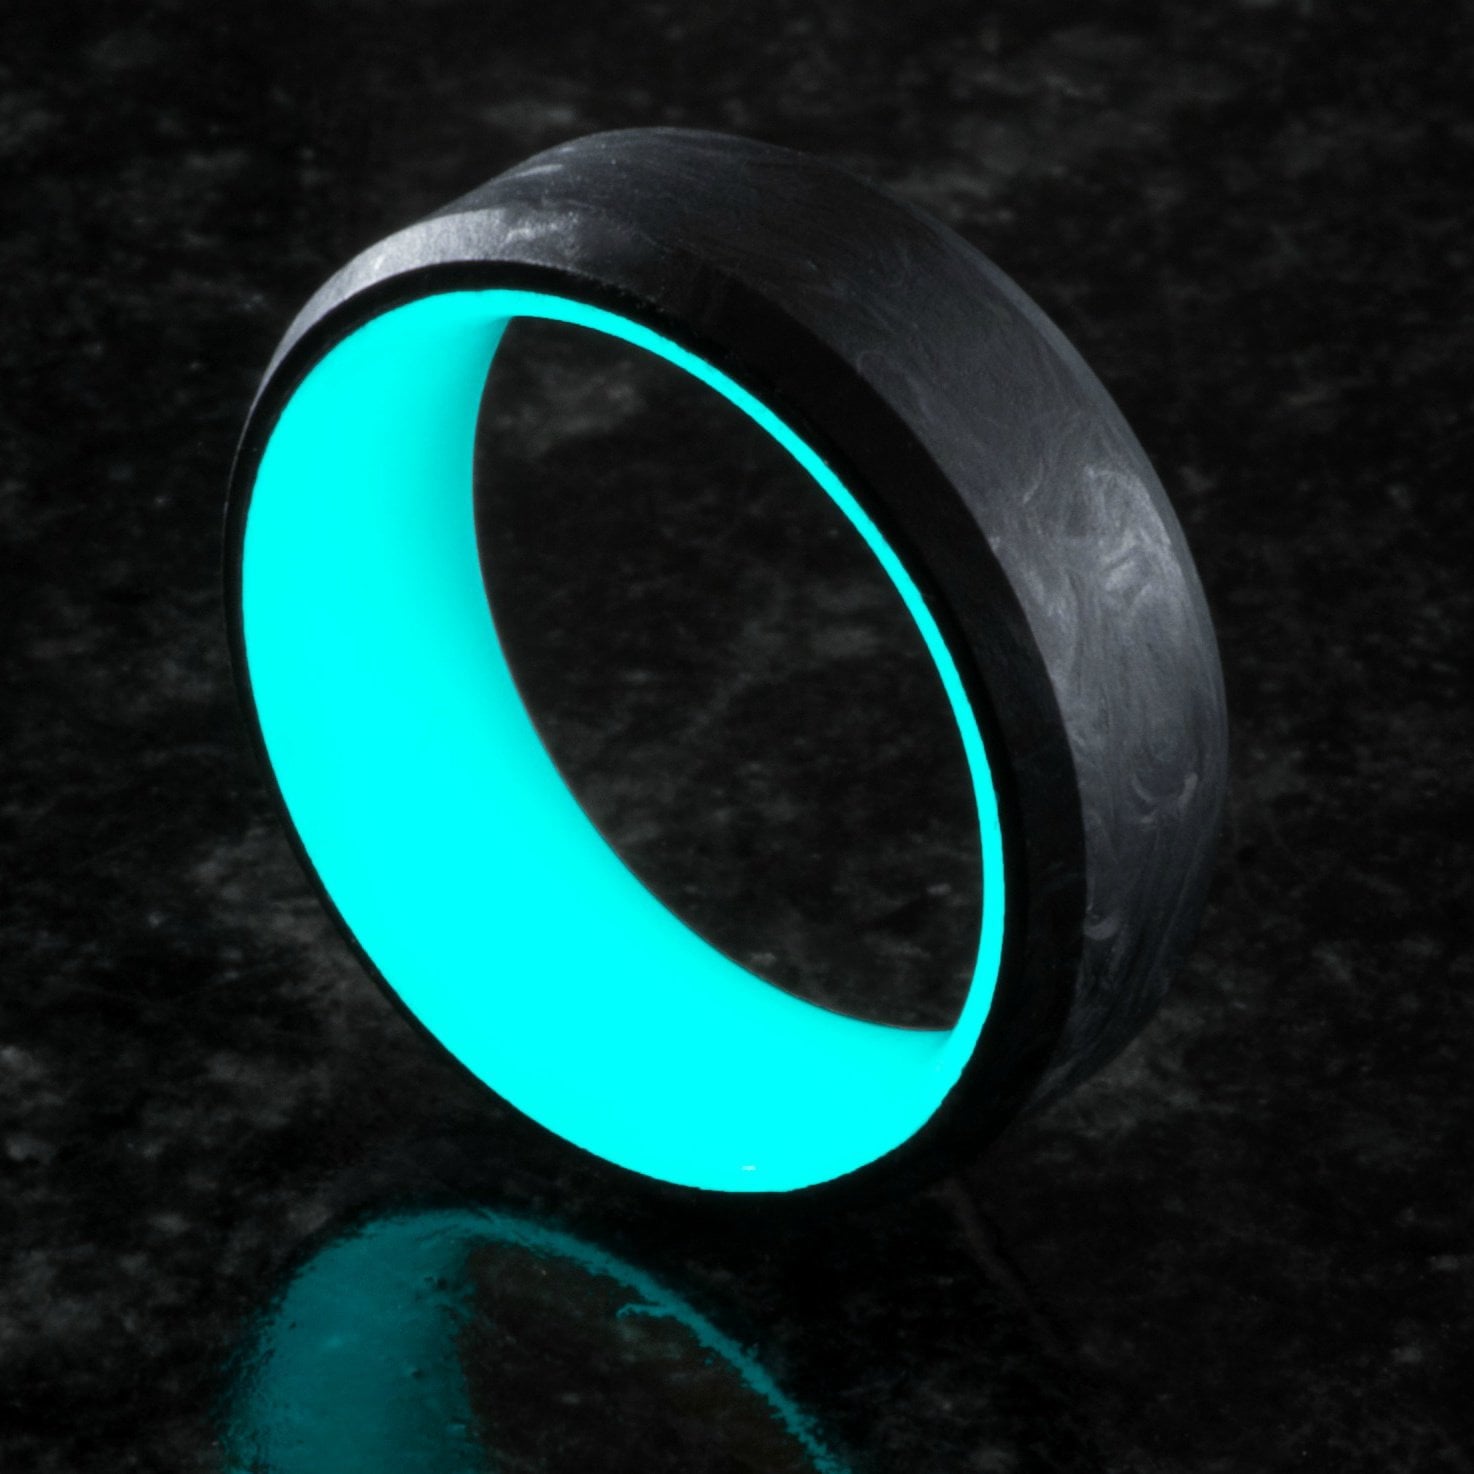 Turquoise Glow Ring with Forged Carbon Fiber Exterior and beveled edges.